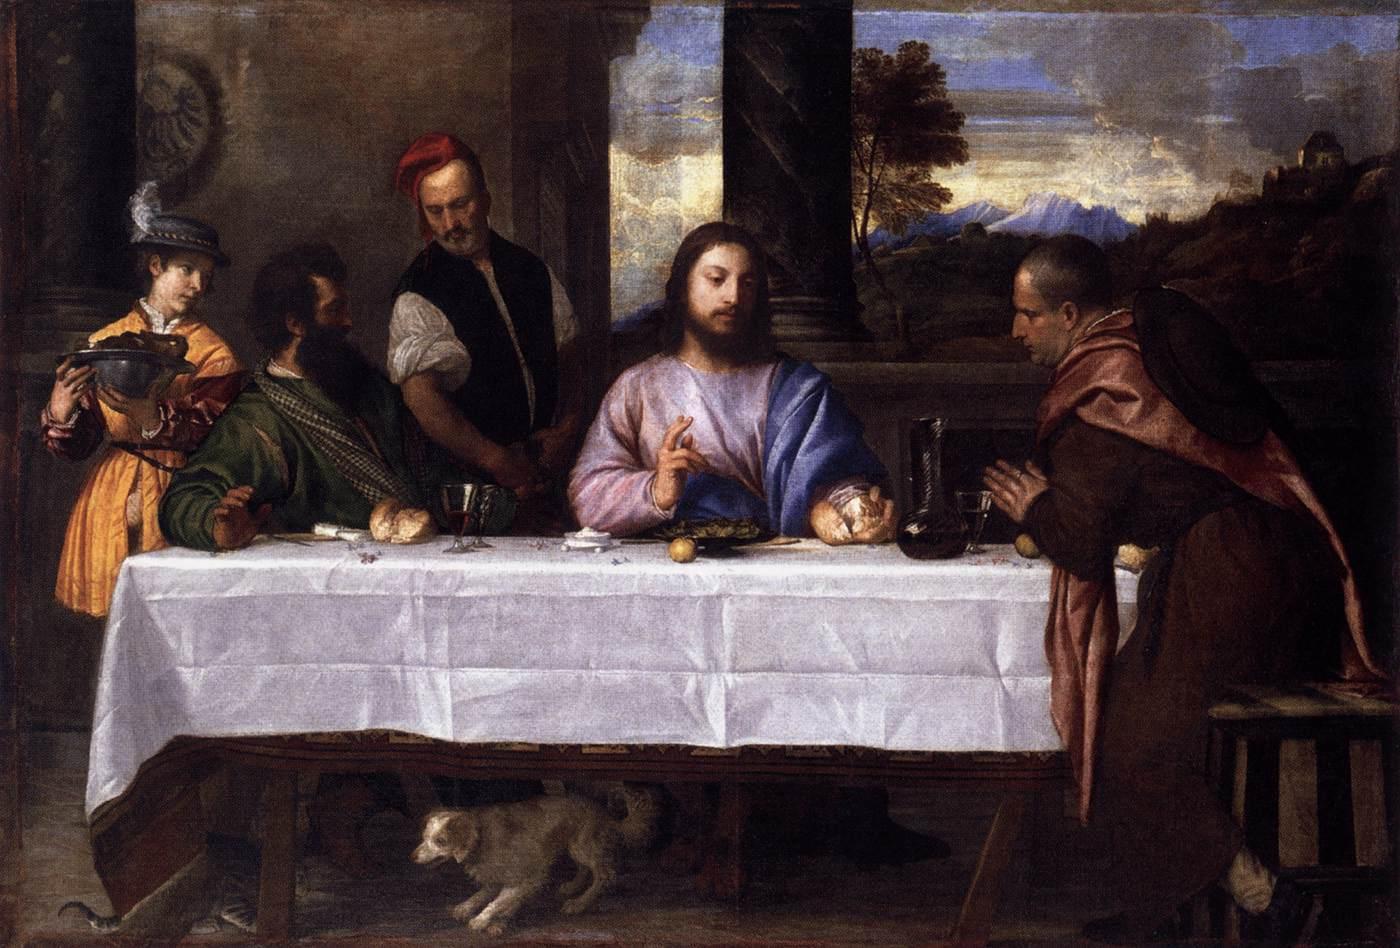 Titian’s ‘The Supper at Emmaus’ has been sent over from the Louvre